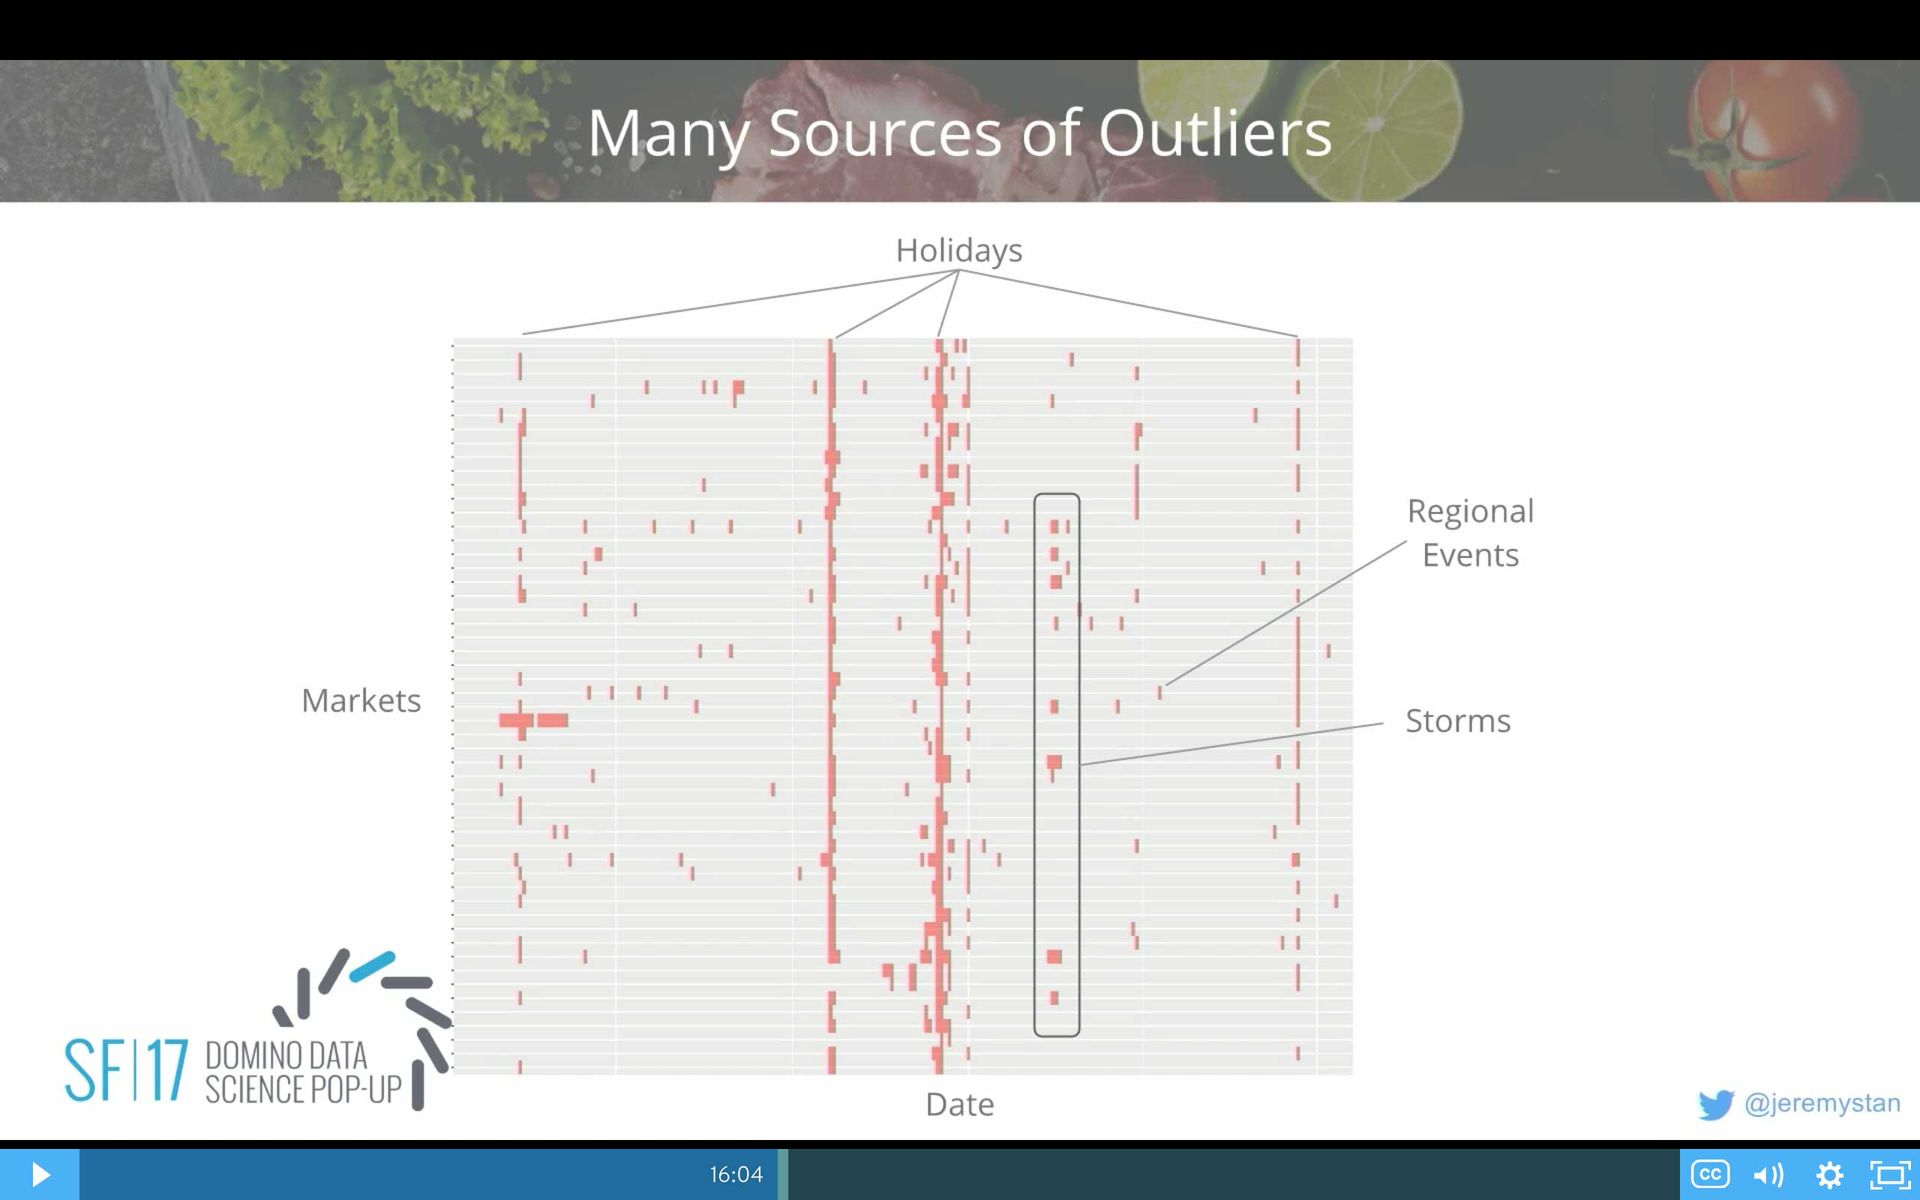 Sources of Outliers